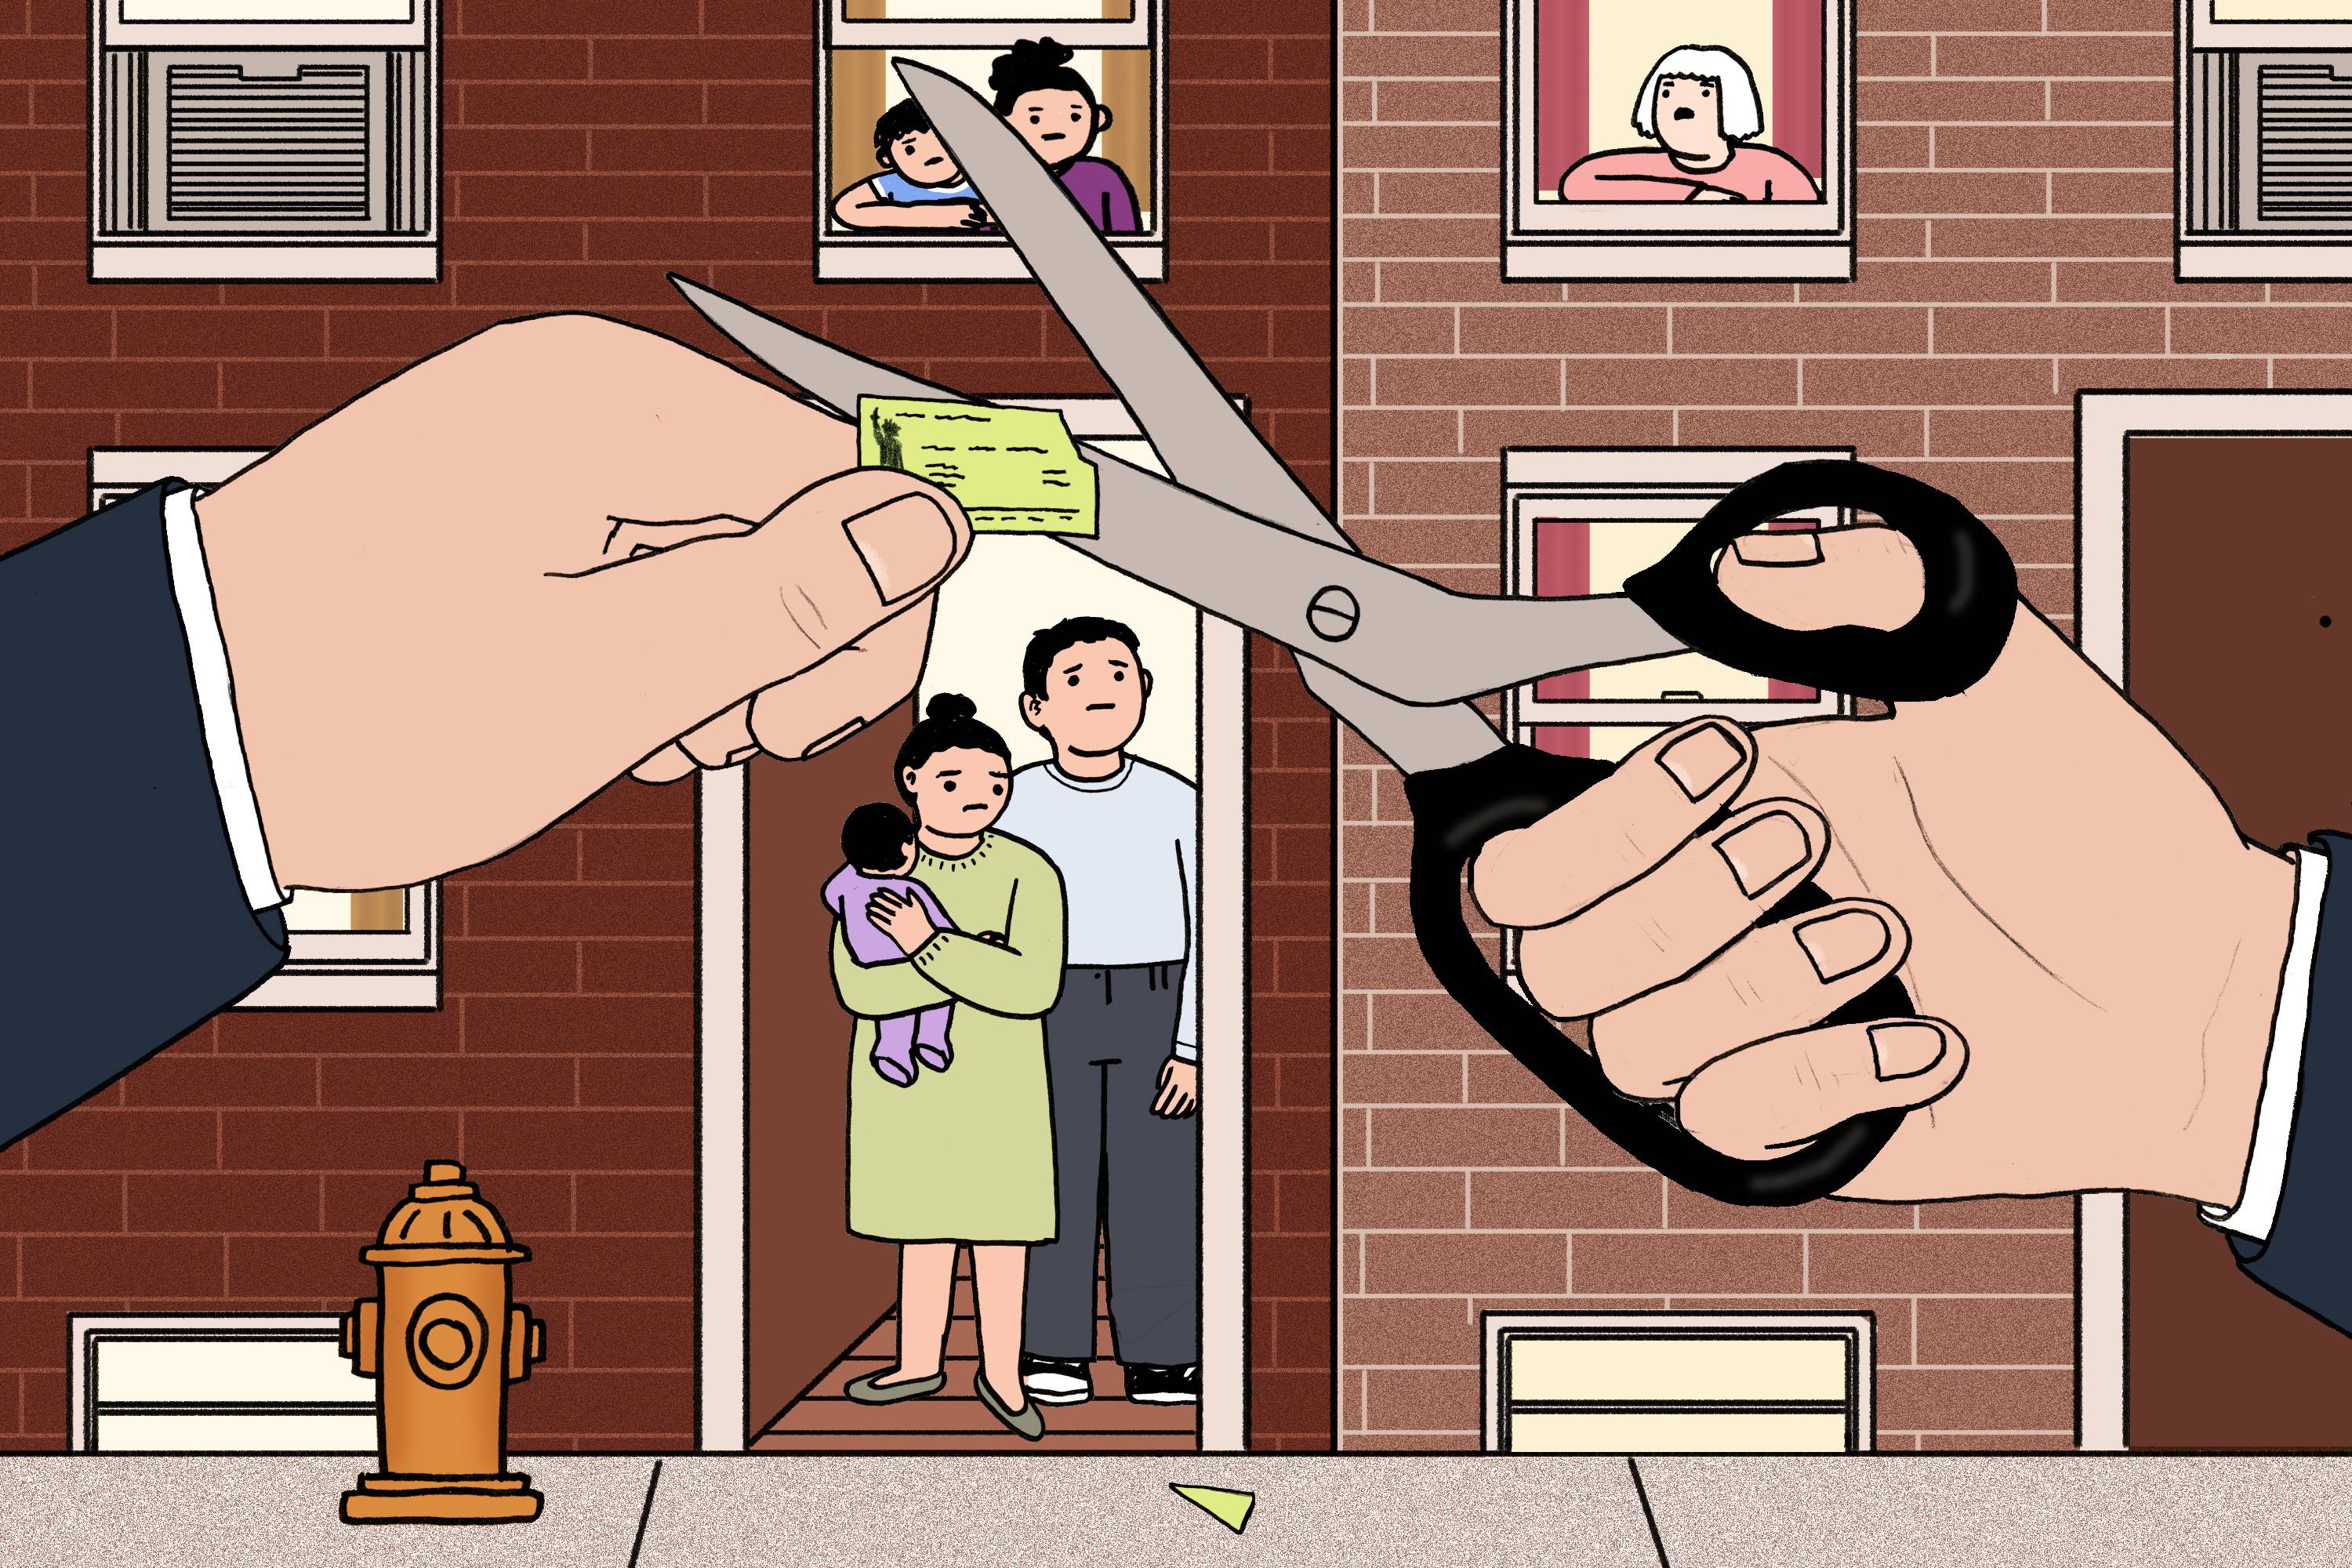 Illustration of family with children standing in door of row home in background. In front of them are large hands snipping a corner off a check with massive scissors.